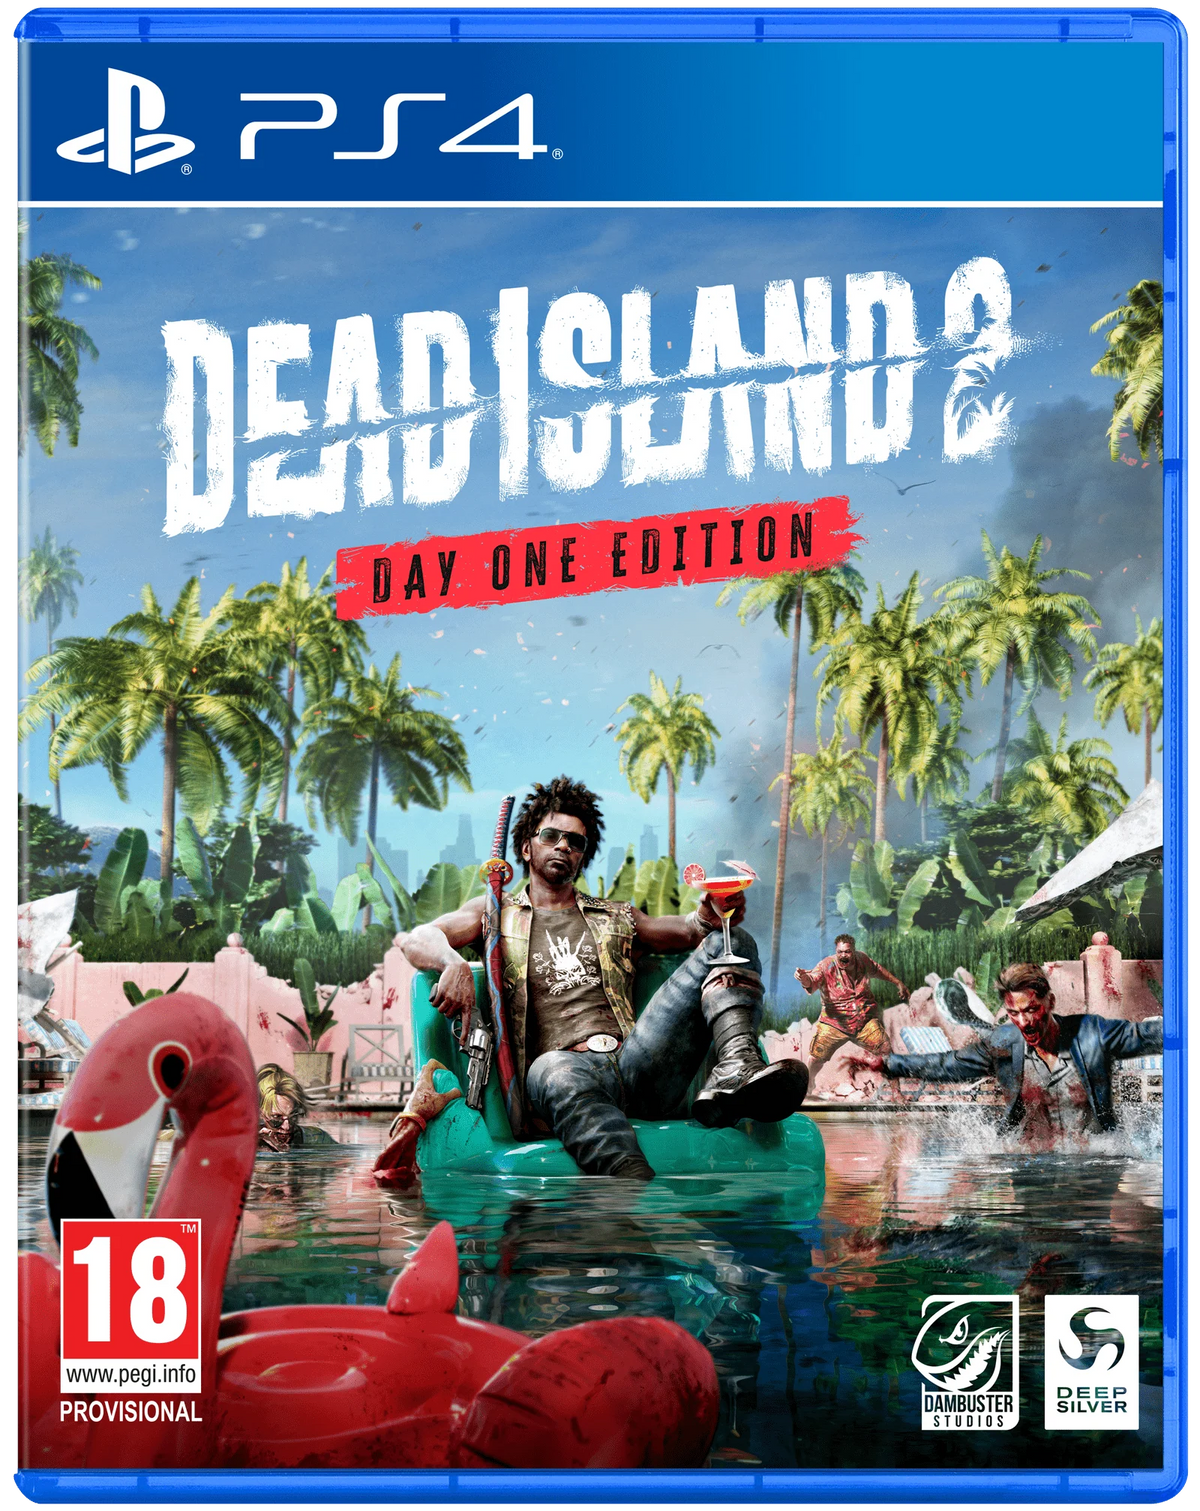 PS4 Dead Island 2 Day One Edition - Albagame